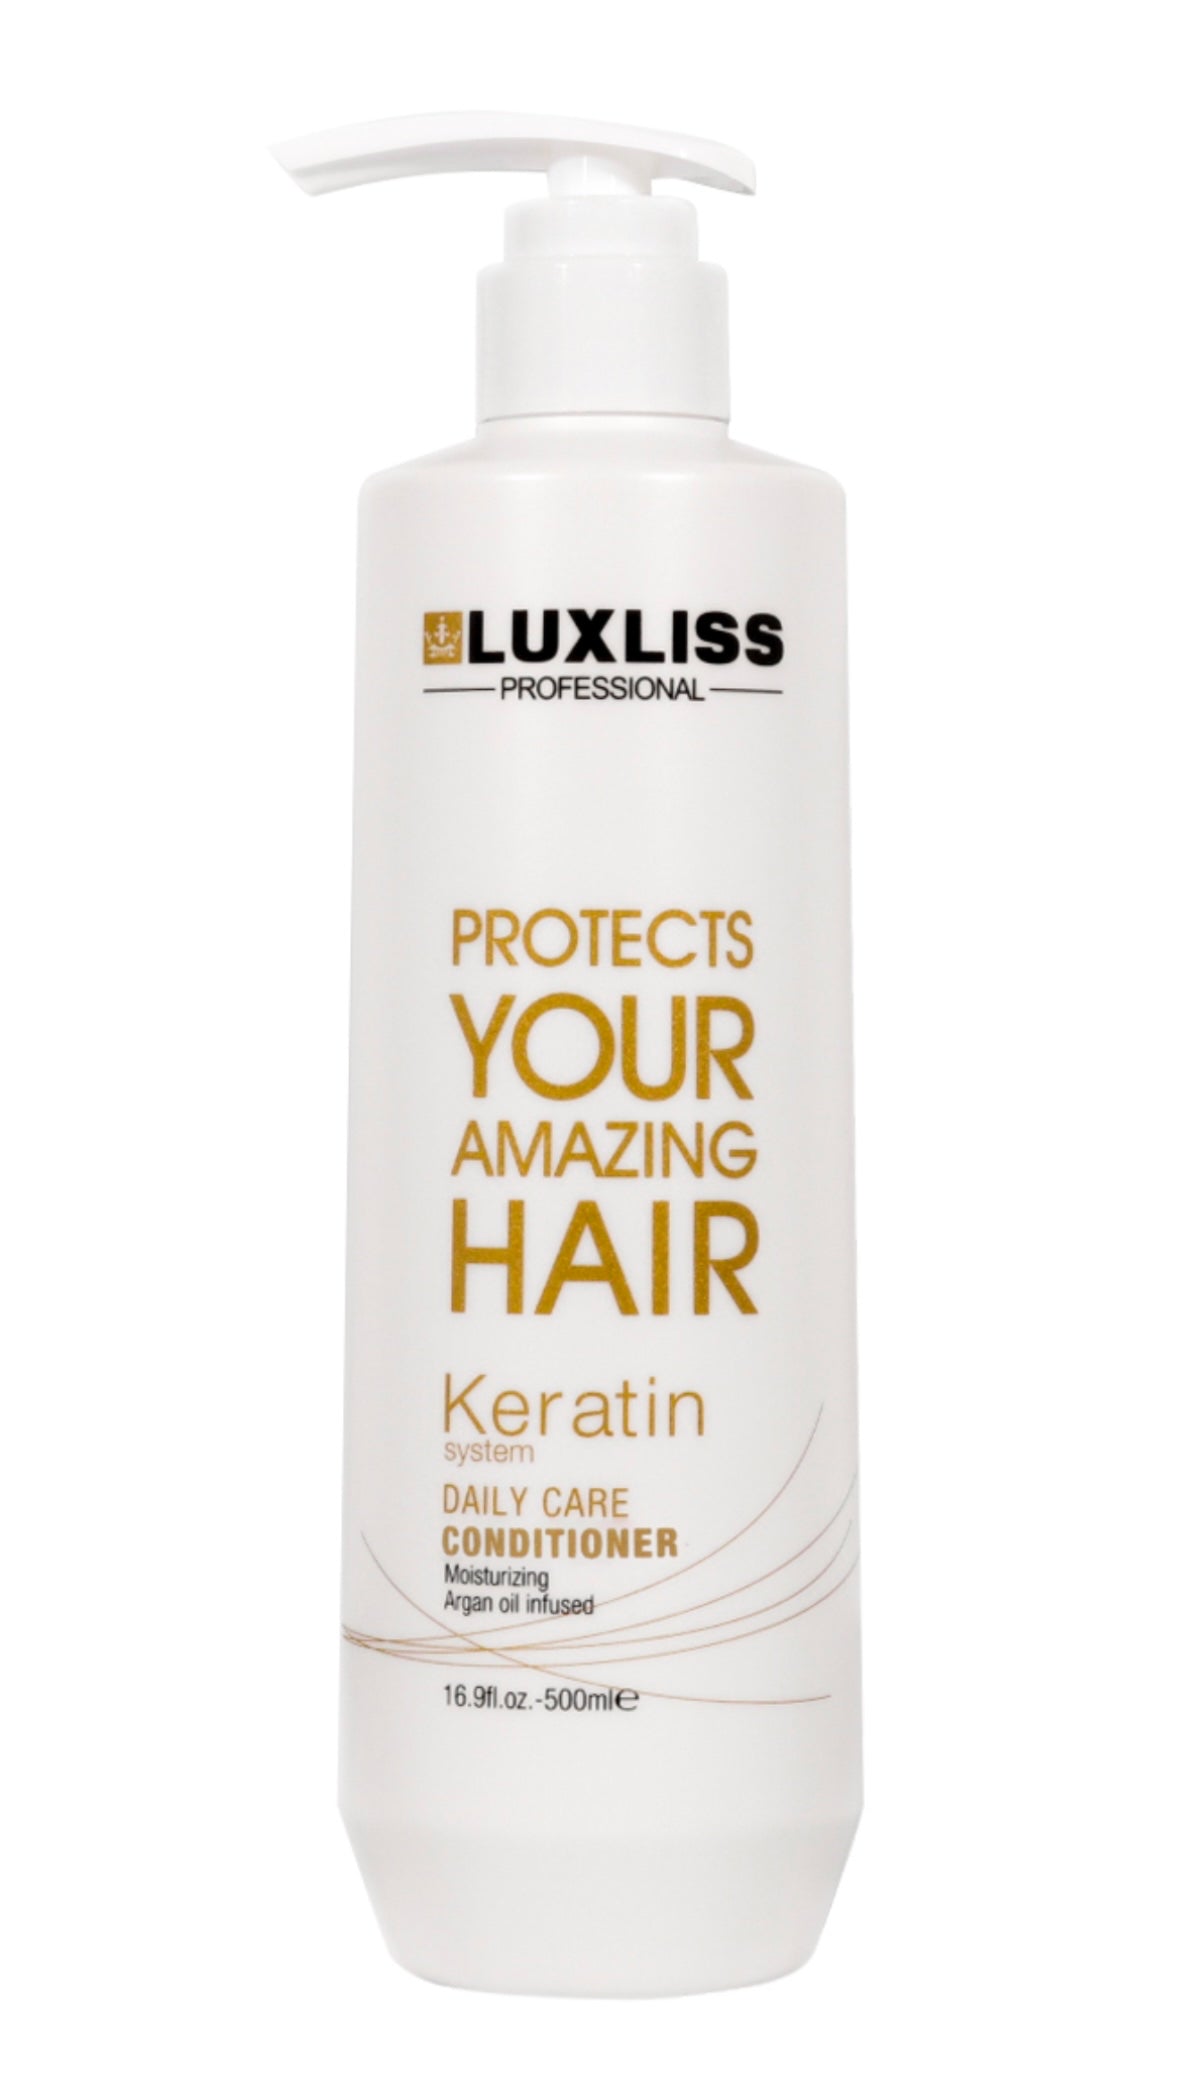 LUXLISS PROFESSIONAL KERATIN DAILY CARE CONDITIONER